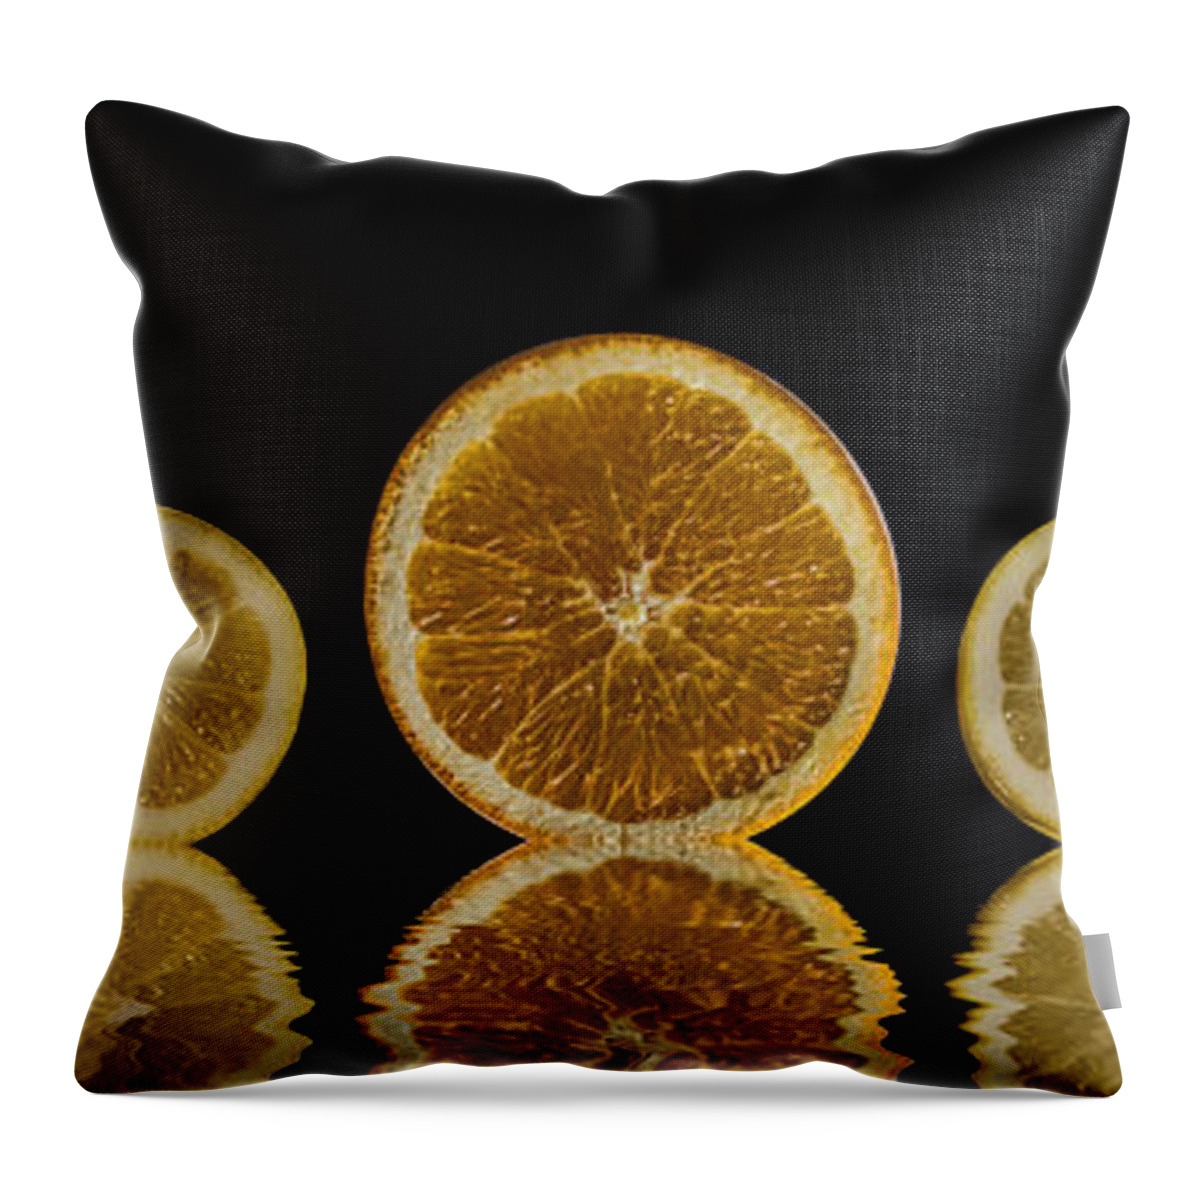 Oranges Throw Pillow featuring the photograph Orange Lemon Reflection by Shirley Mangini